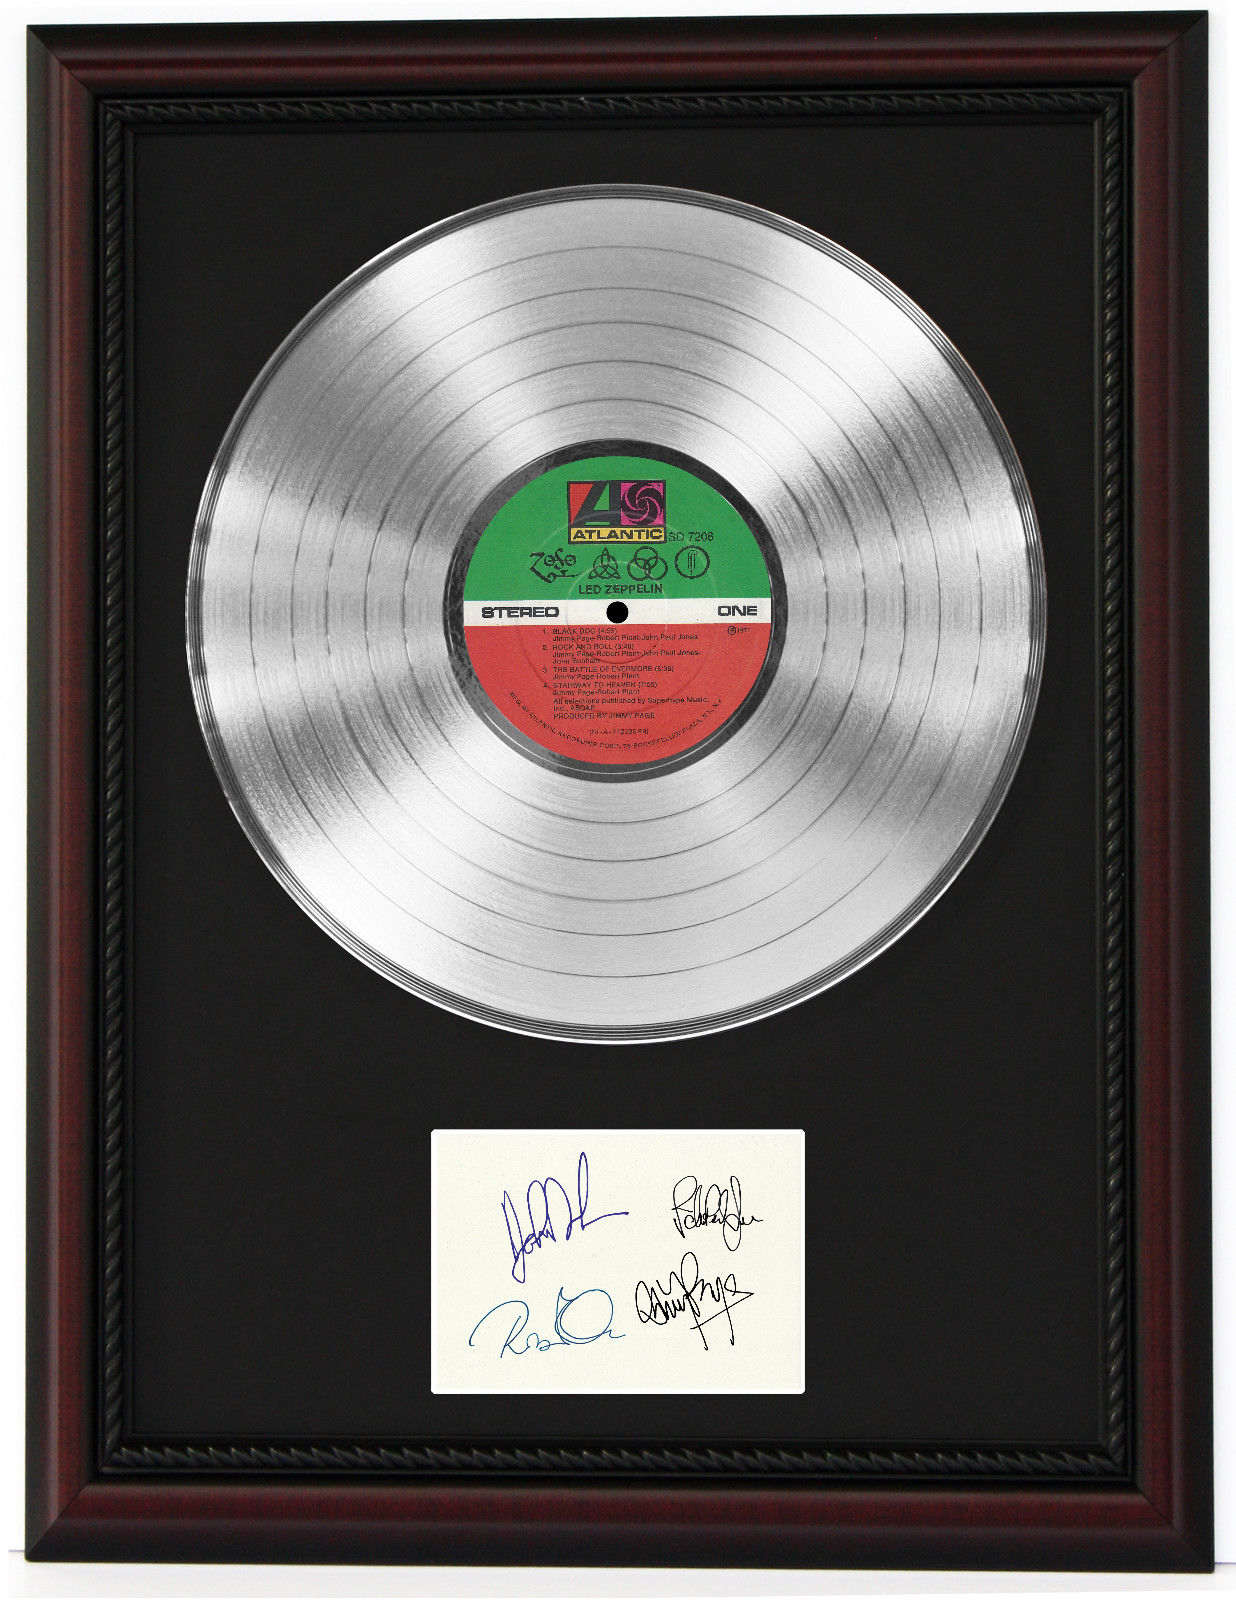 Distribution bound Practical Led Zeppelin Cherrywood Framed Platinum LP Record Ltd Signature Display C3  - Gold Record Outlet Album and Disc Collectible Memorabilia